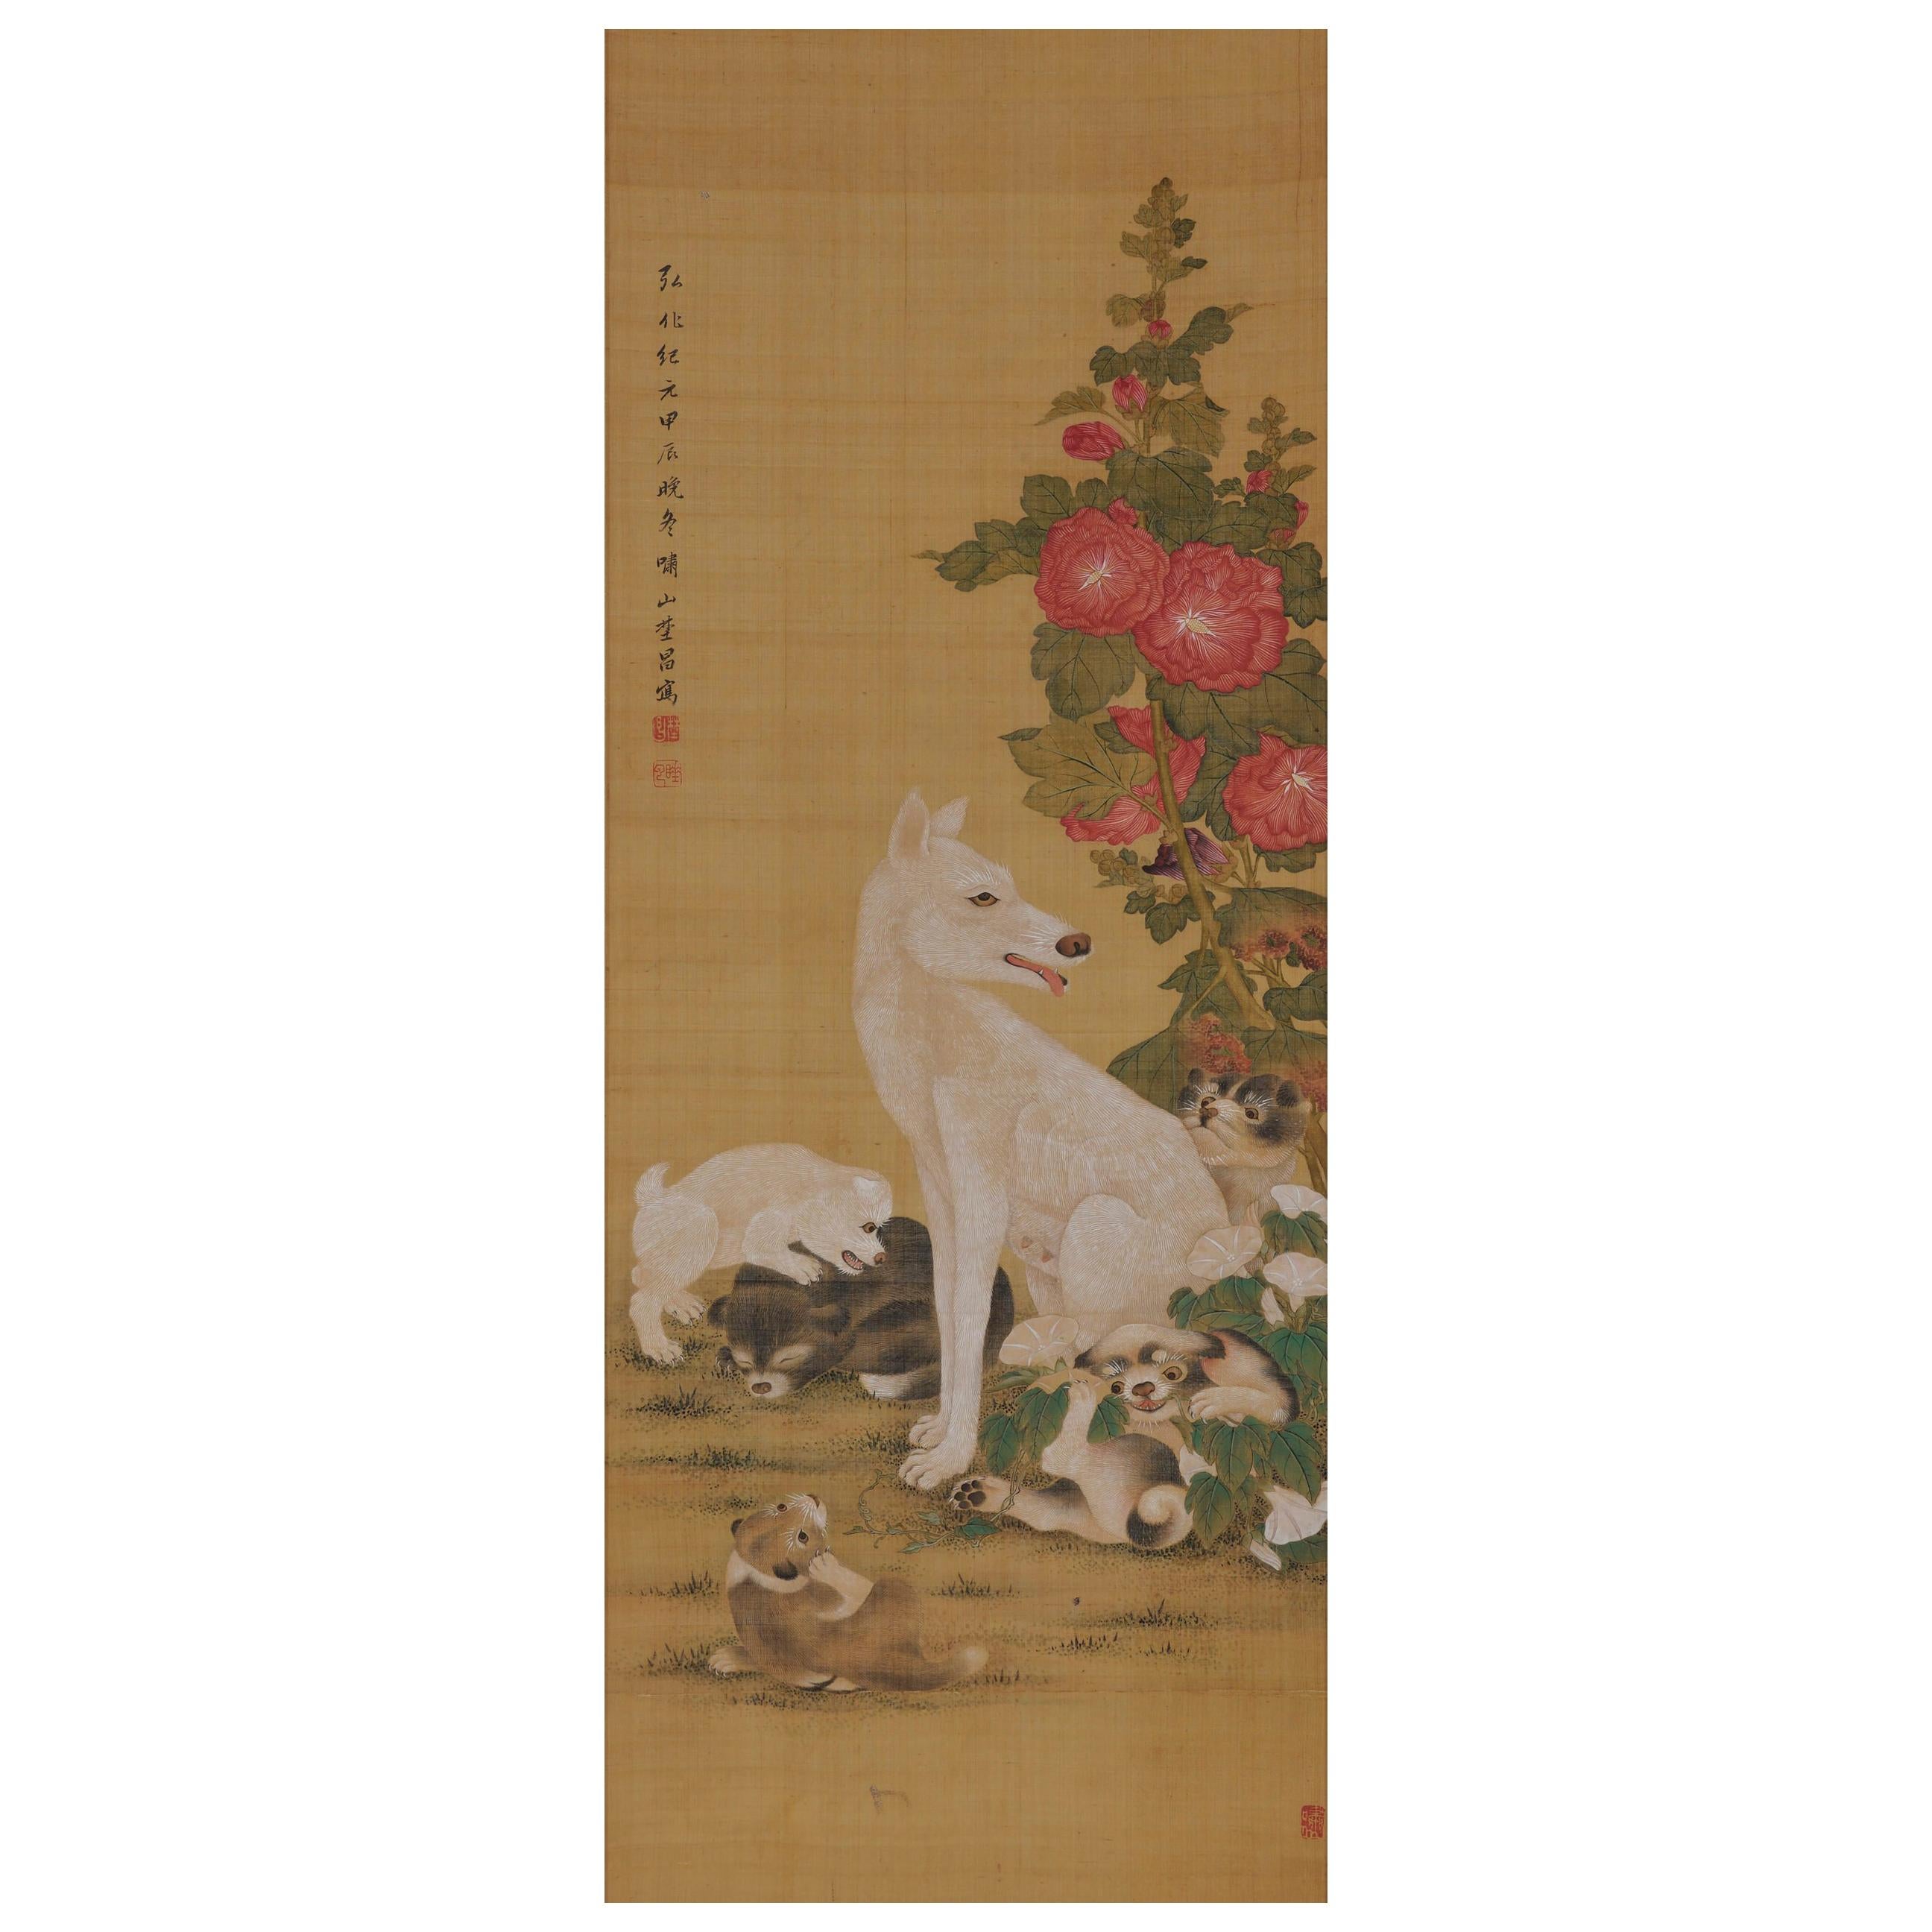 1844 - Chichi, Japanese Scroll Painting. Colour on Silk